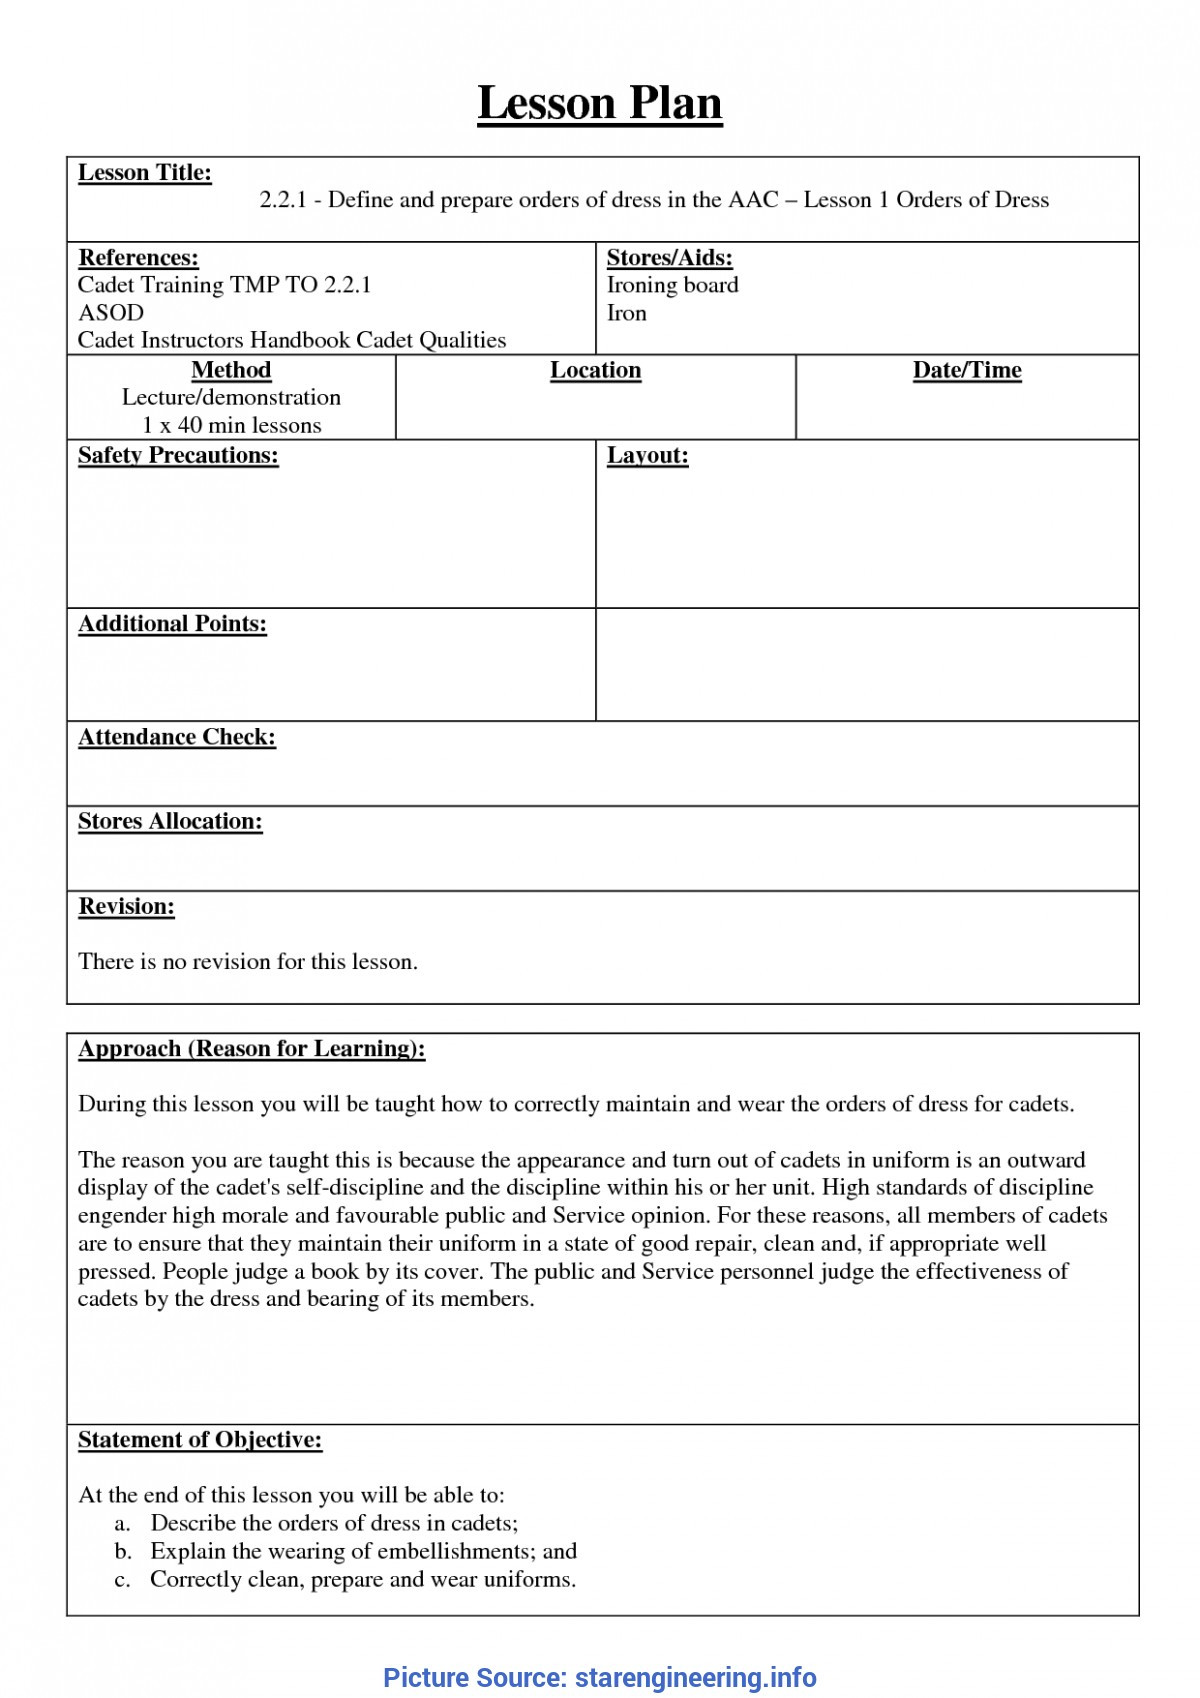 Lesson Plan Template Example Lesson Plan Template Nsw Ten Fantastic Vacation Ideas for